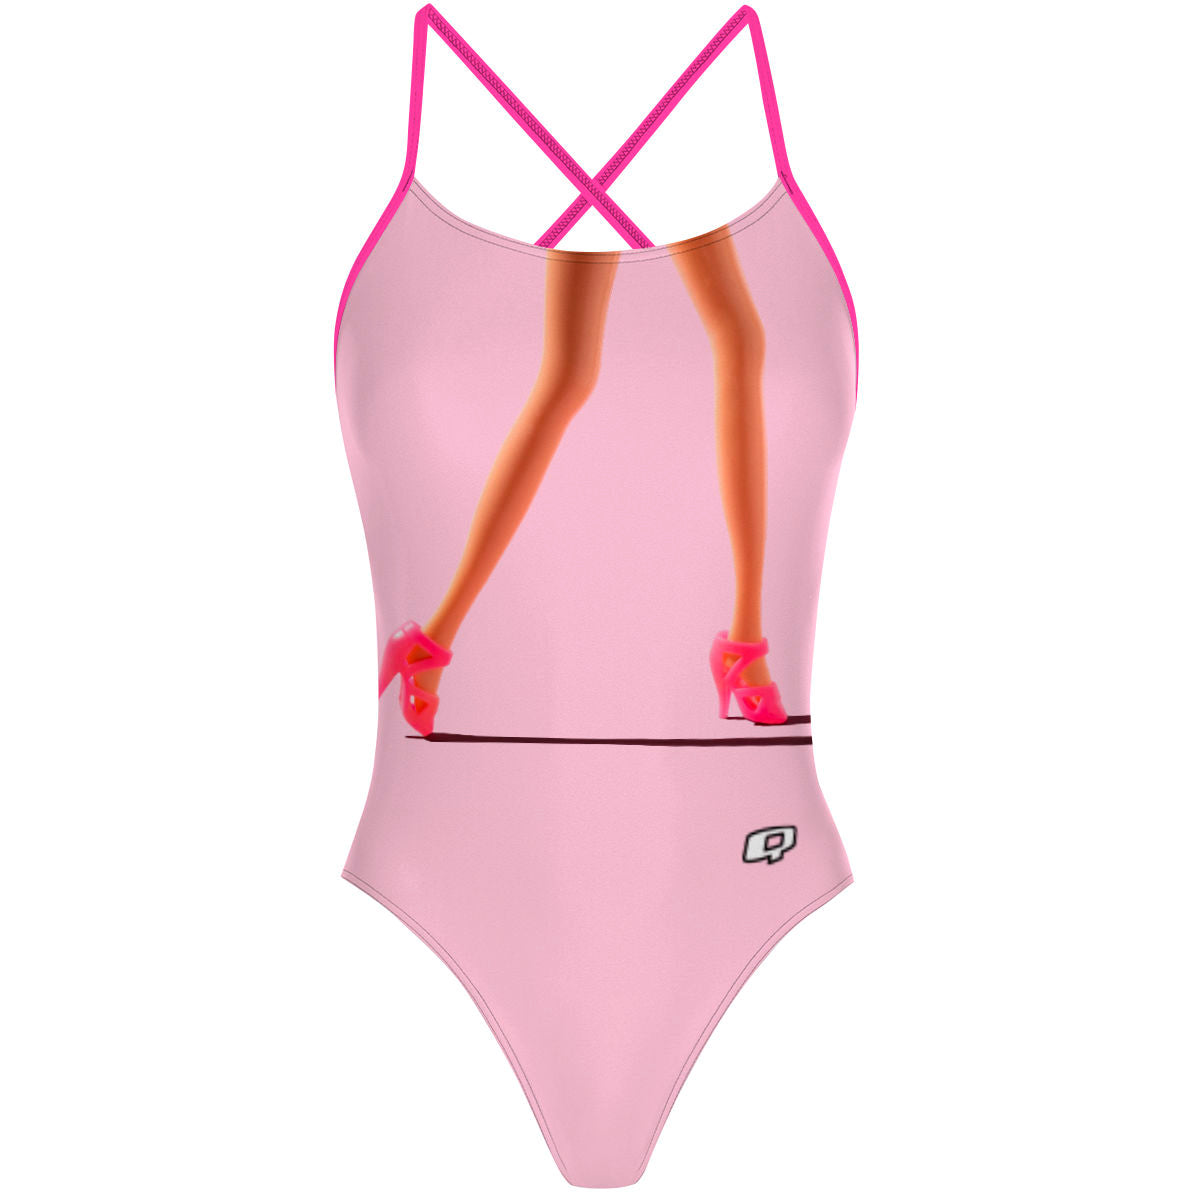 Pink legs for days - "X" Back Swimsuit